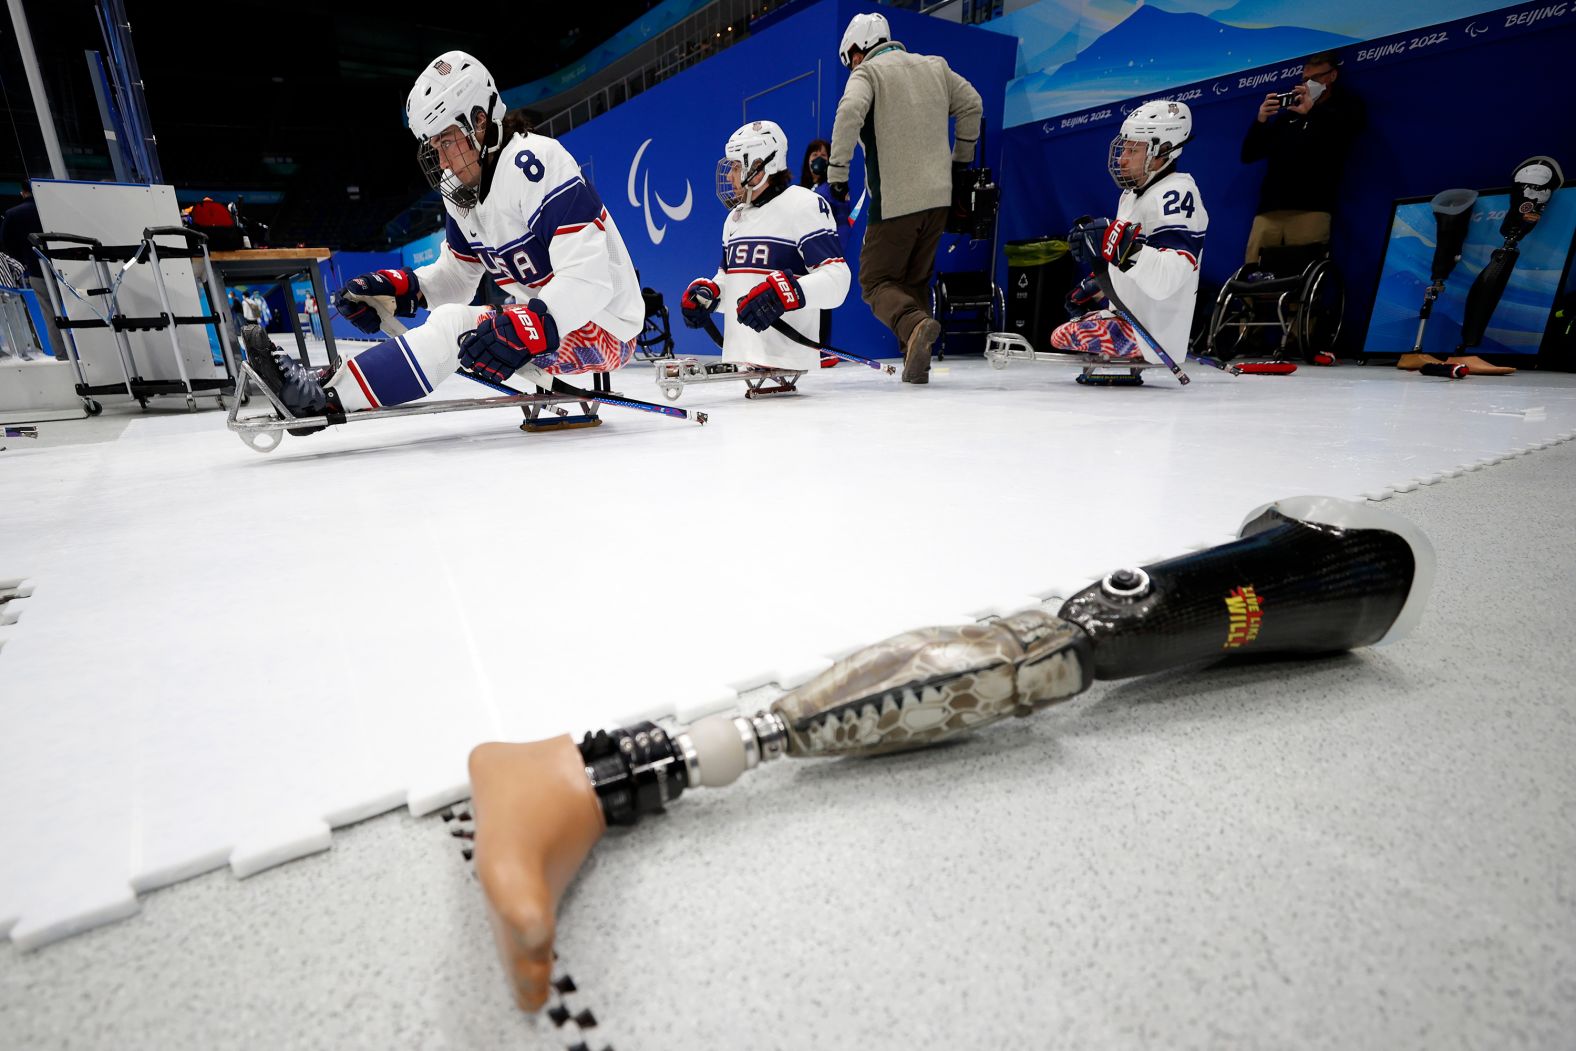 Members of the USA sled hockey team prepare for a hockey game against South Korea on March 6.